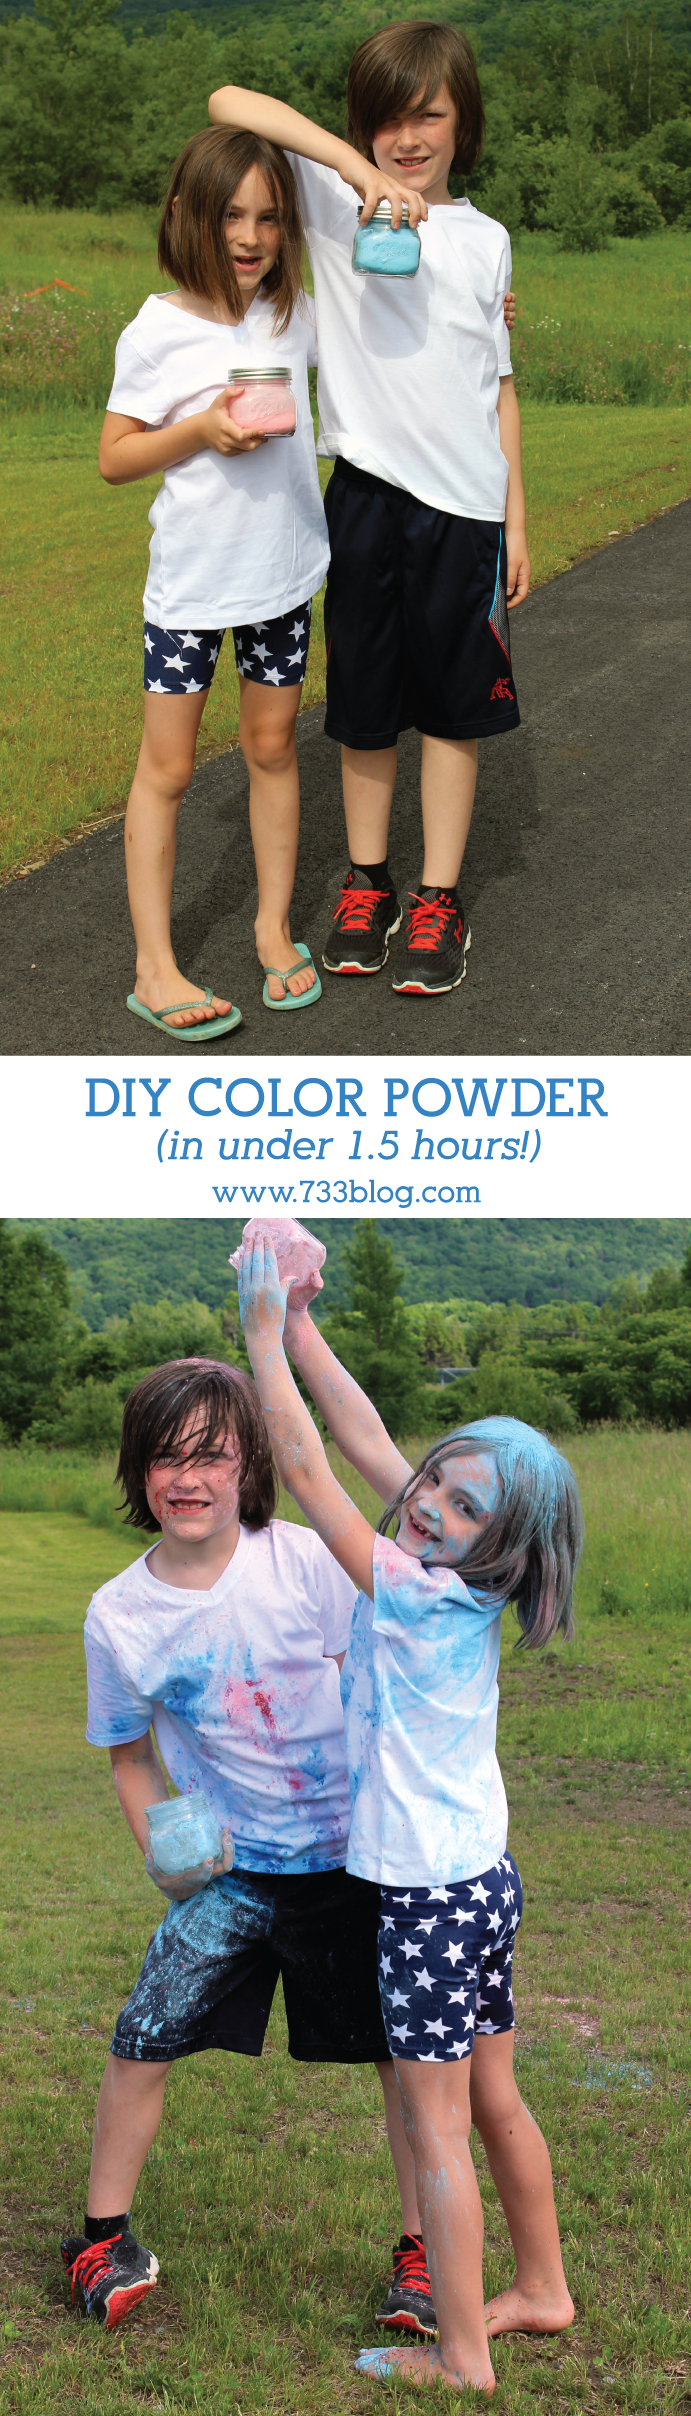 FAST DIY Color Powder Recipe for neighborhood color runs and color wars! Also perfect for gender reveals!